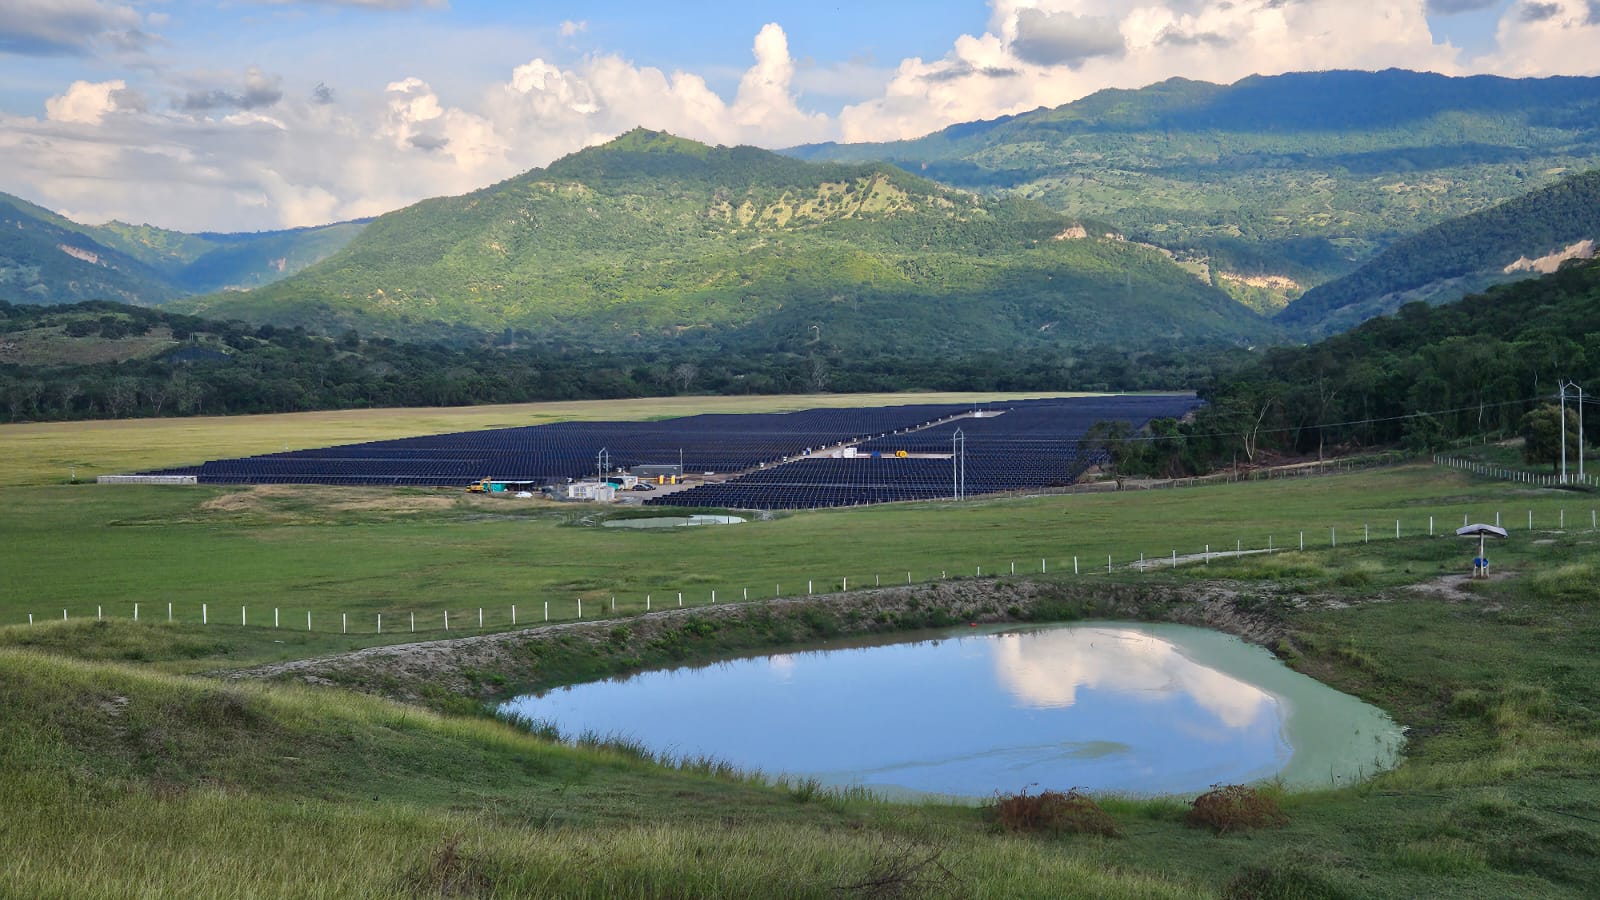 Enerland Group completes 100 MWp in photovoltaic projects in Colombia